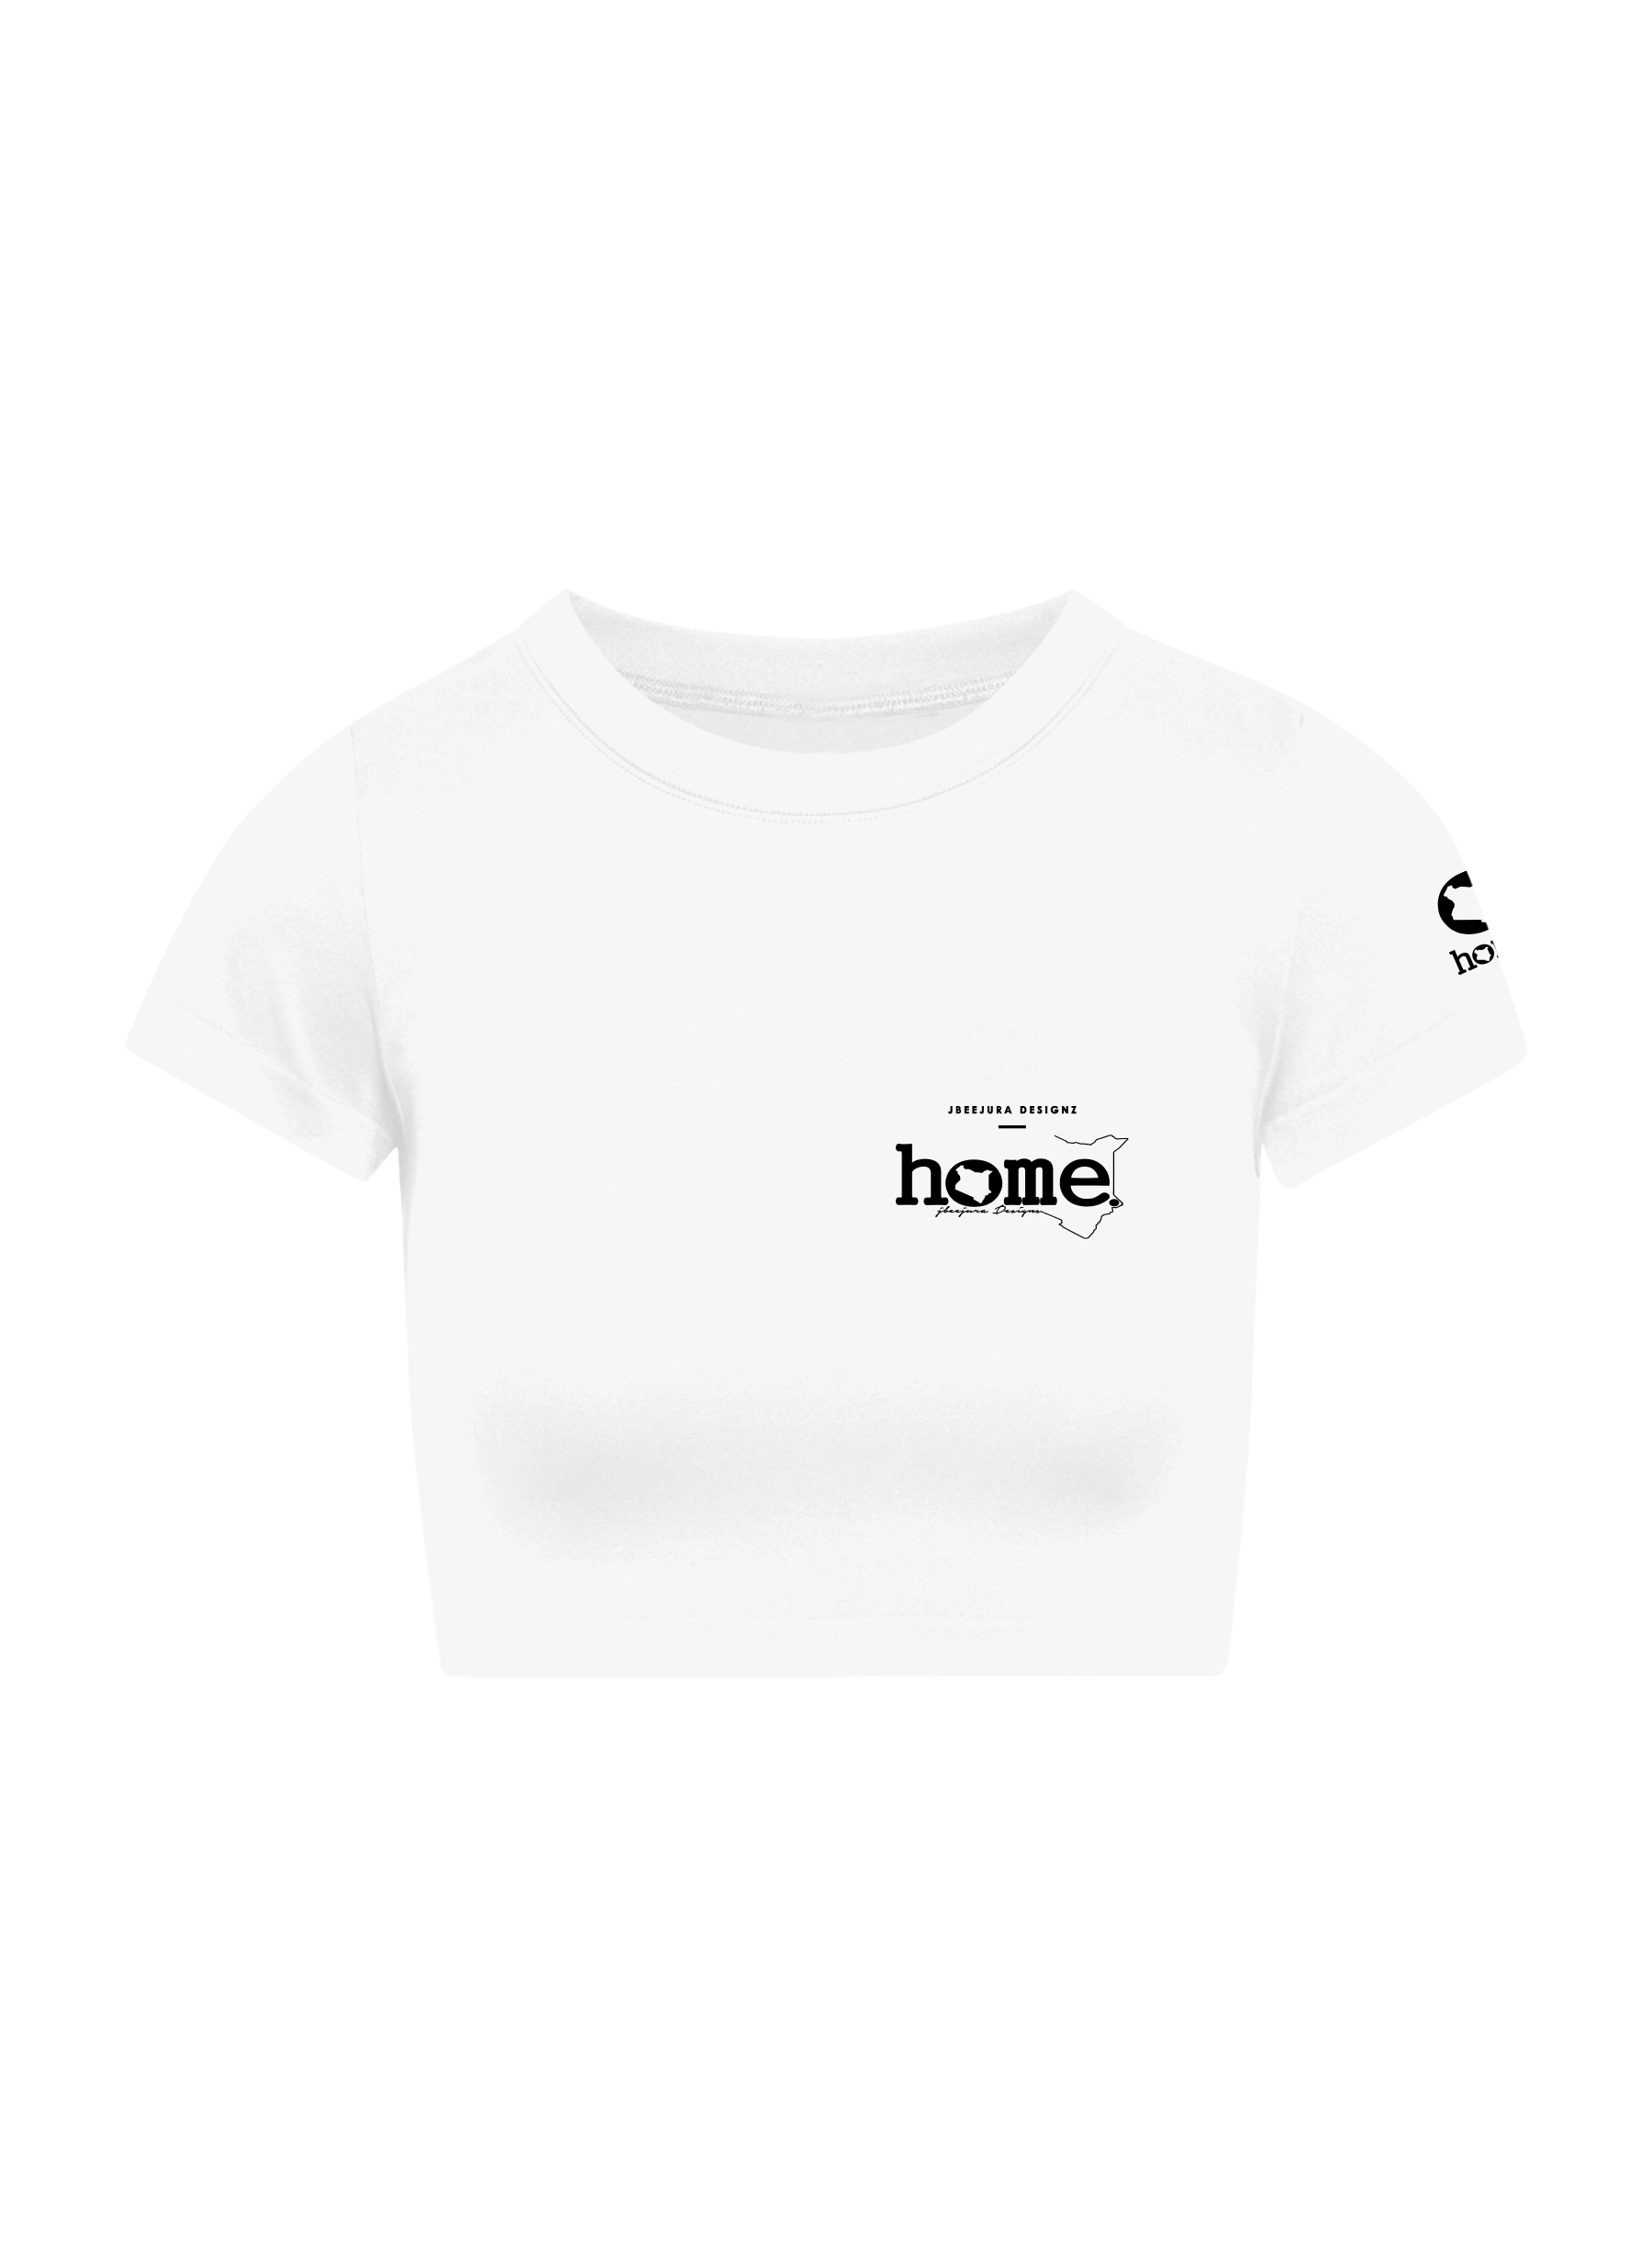 home_254 SHORT SLEEVED WHITE CROPPED ARIA TEE WITH A BLACK 3D WORDS PRINT 